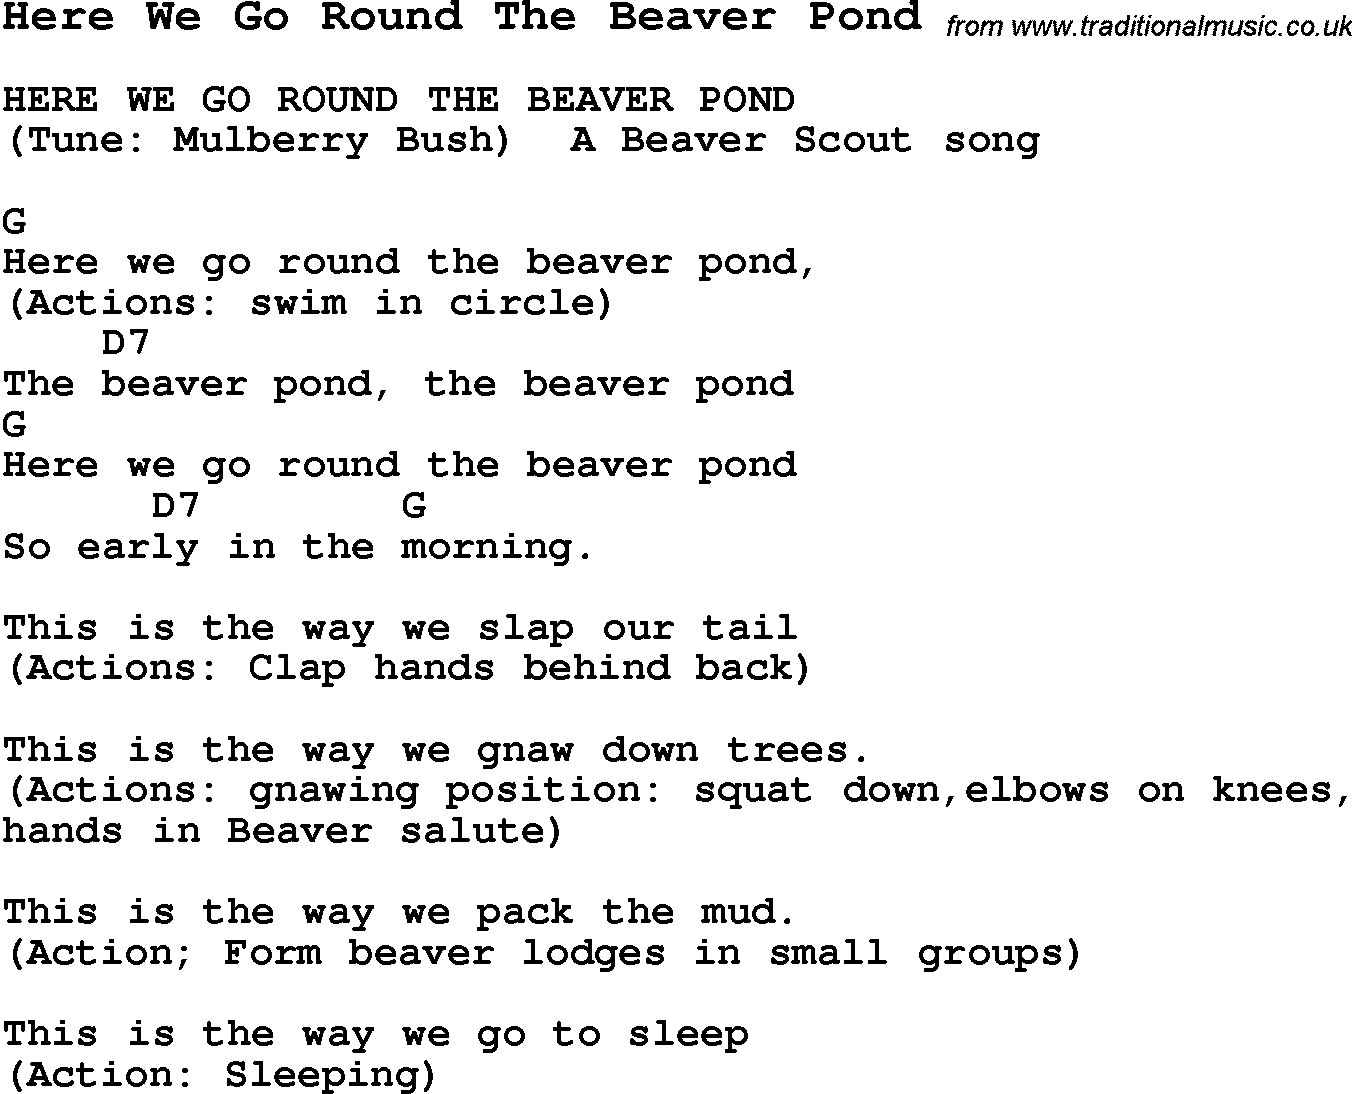 Summer Camp Song, Here We Go Round The Beaver Pond, with lyrics and